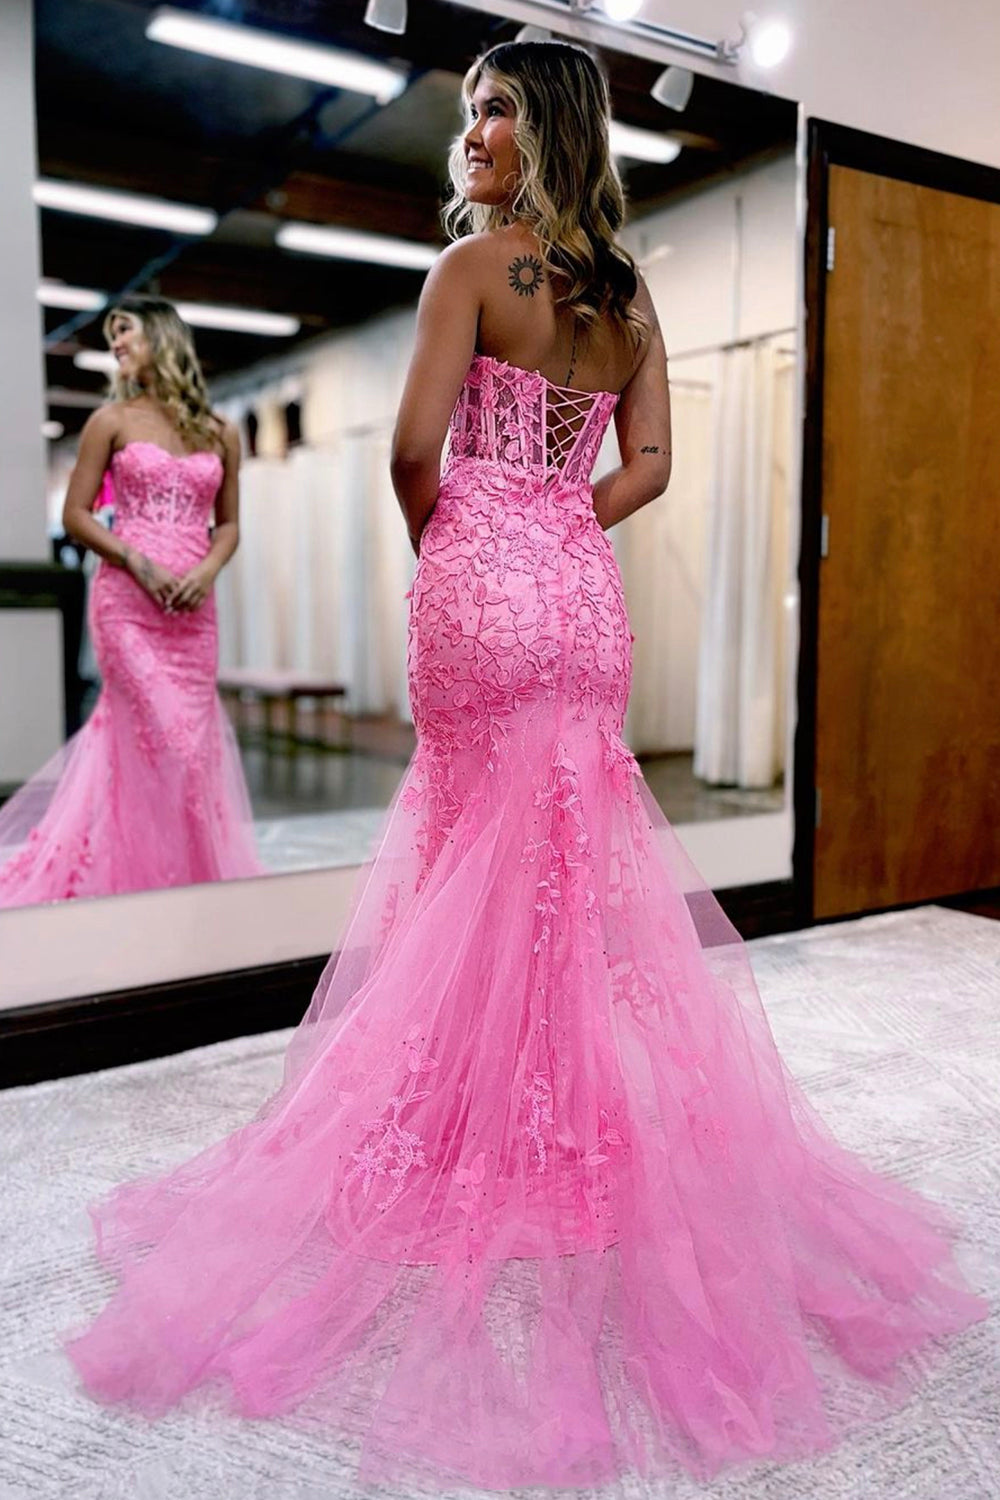 Mermaid Lace Long Prom Dress, Strapless Formal Evening Dress